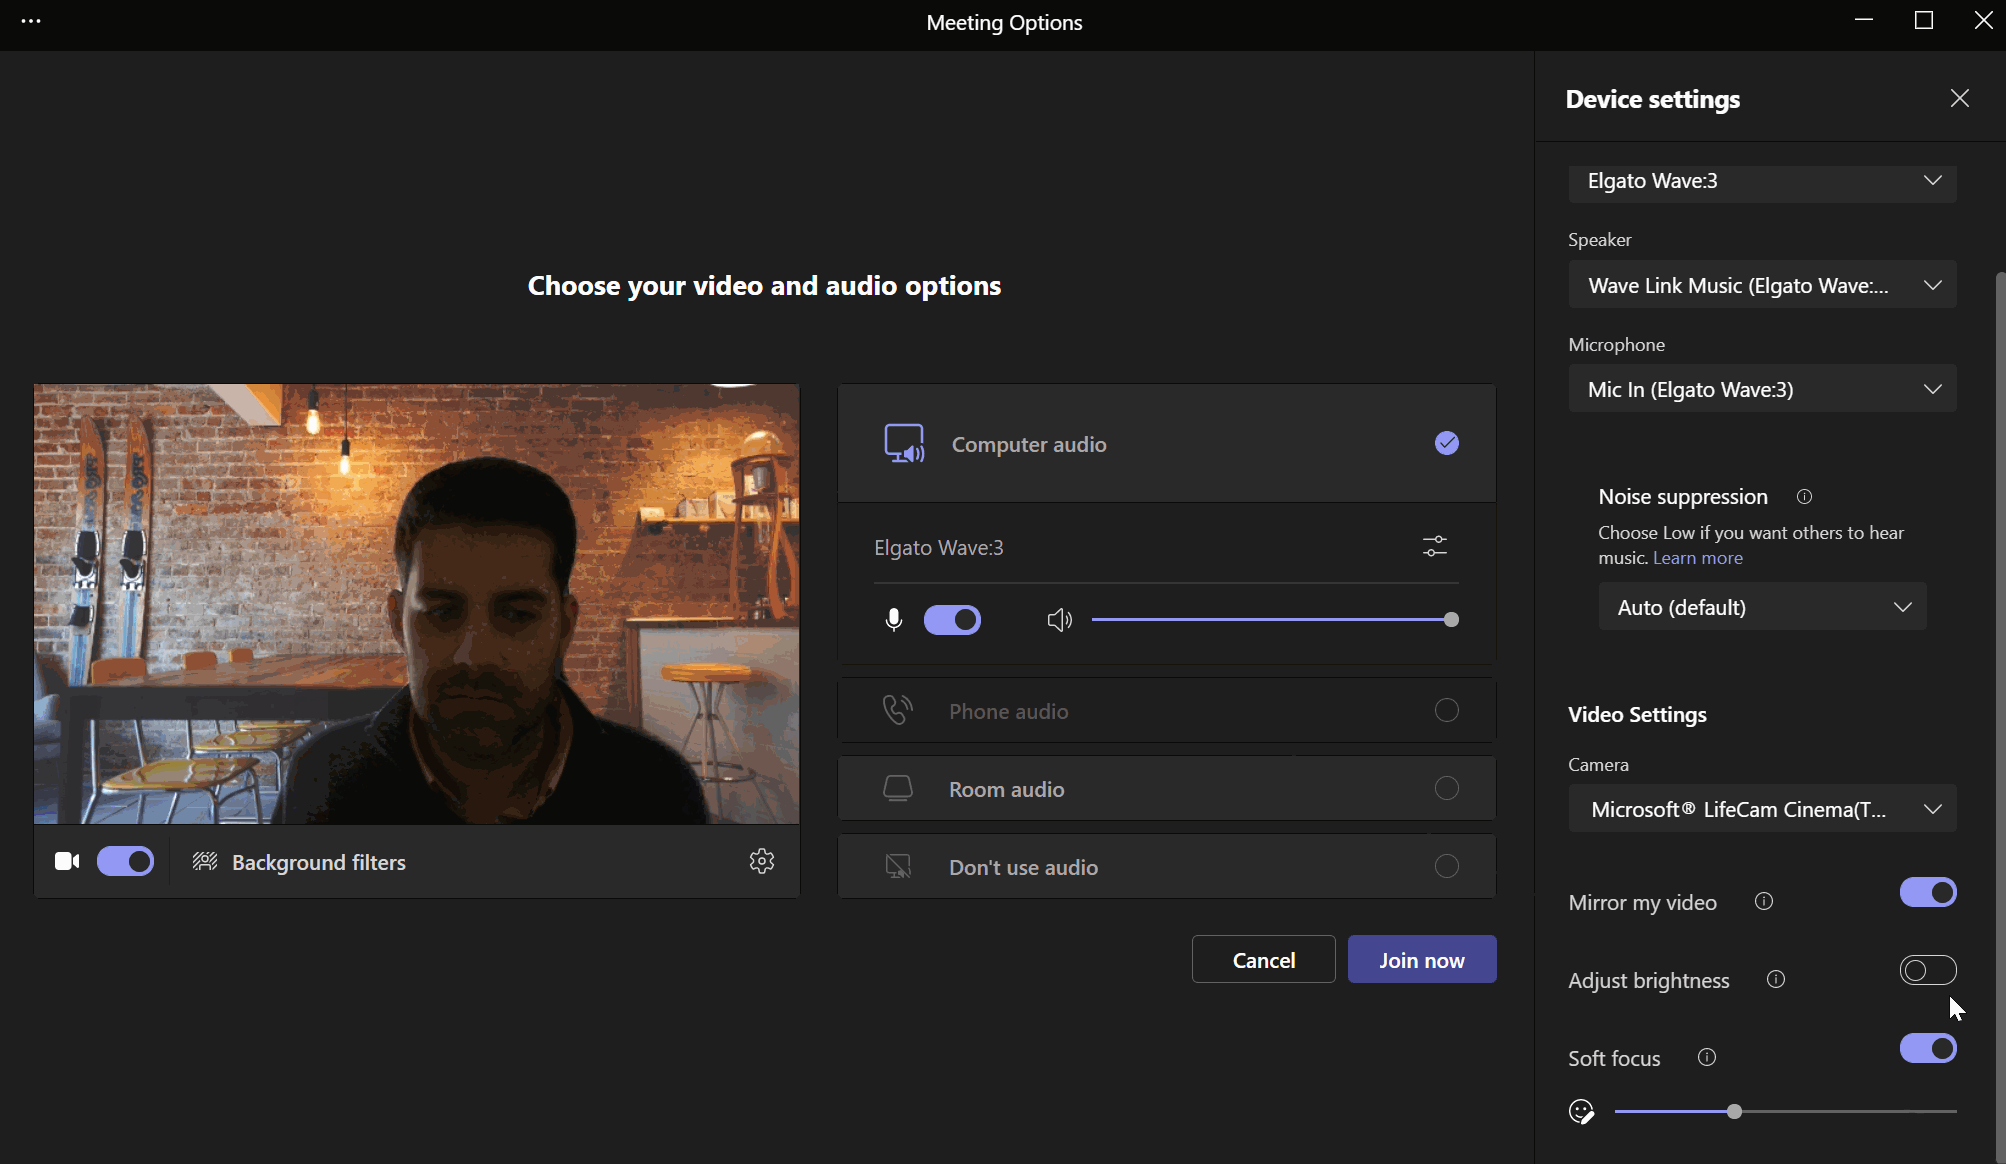 Adjust the brightness and focus of your camera in Microsoft Teams video  meetings - HANDS ON Teams